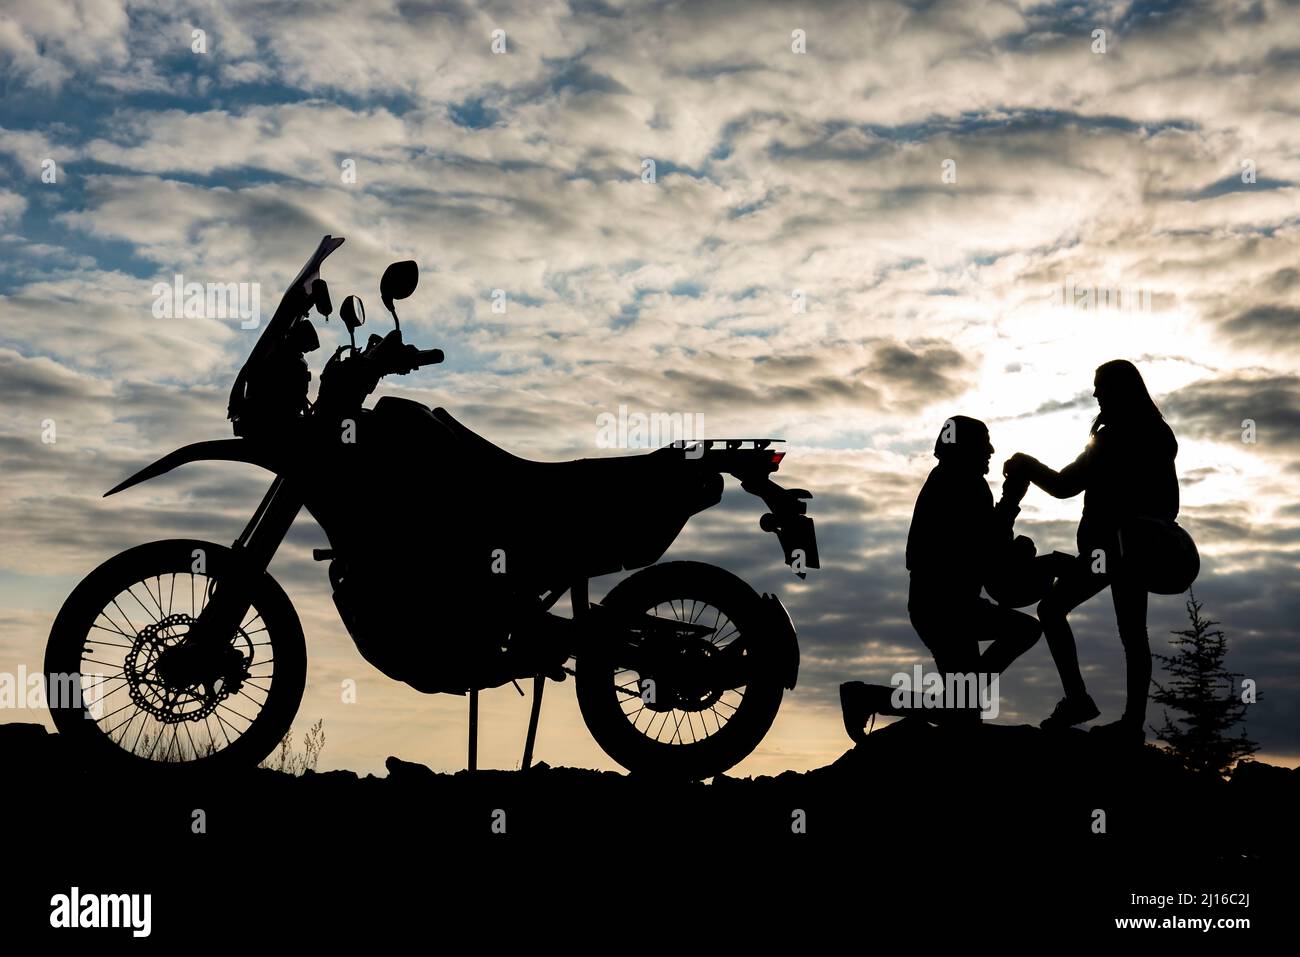 romantic marriage proposal for motorcyclist Stock Photo